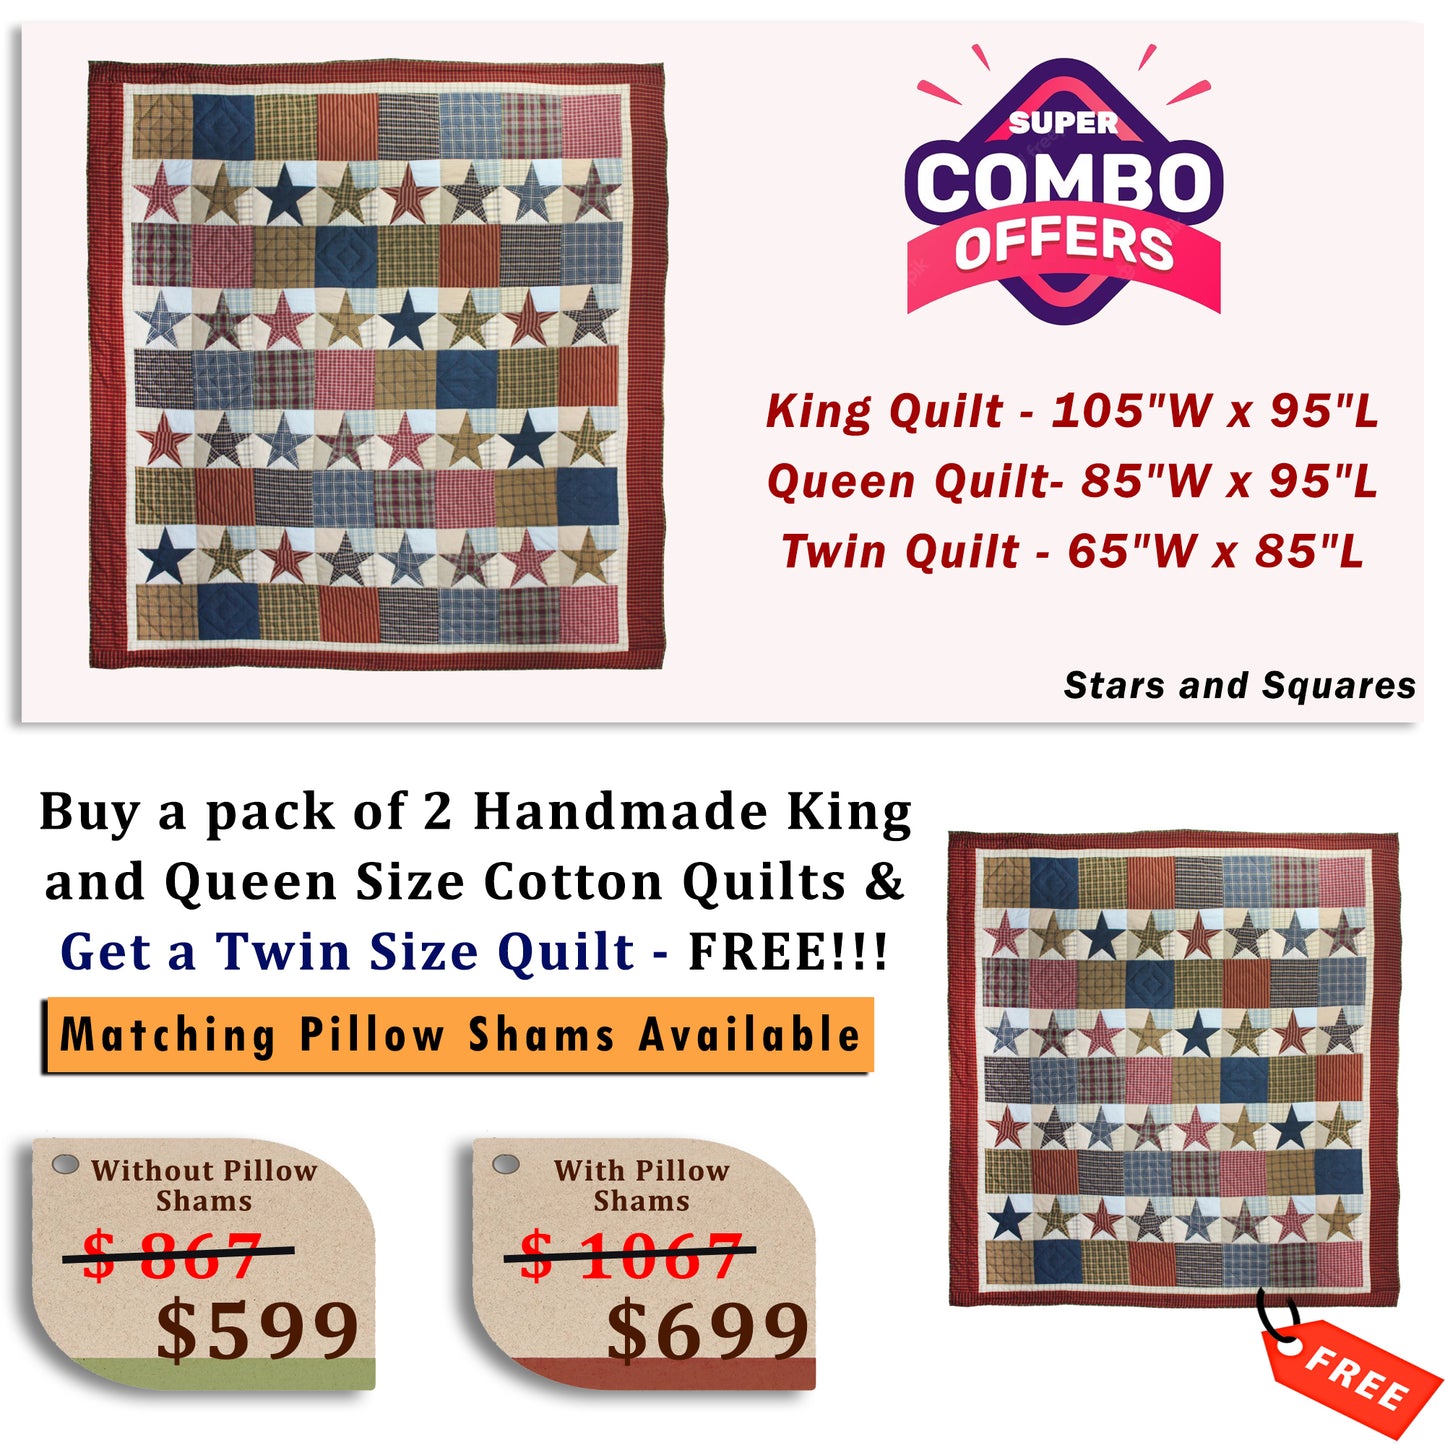 Stars and Squares - Buy a pack of King and Queen Size Quilt, and get a Twin Size Quilt FREE!!!